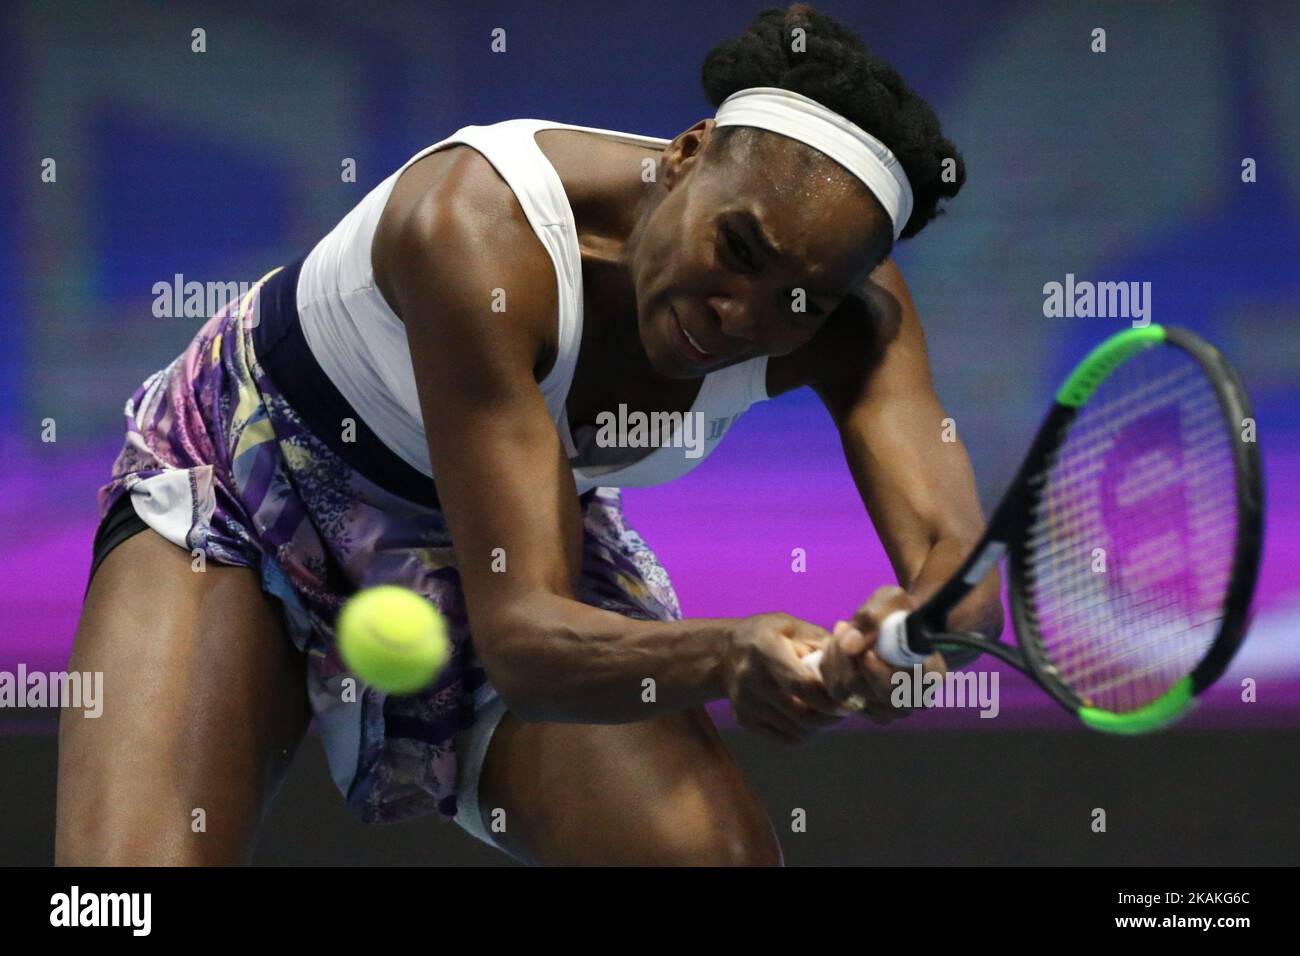 Venus WillIams of USA returns the ball to Kristina Mladenovic of France during the St. Petersburg Ladies Trophy ATP tennis tournament match in St